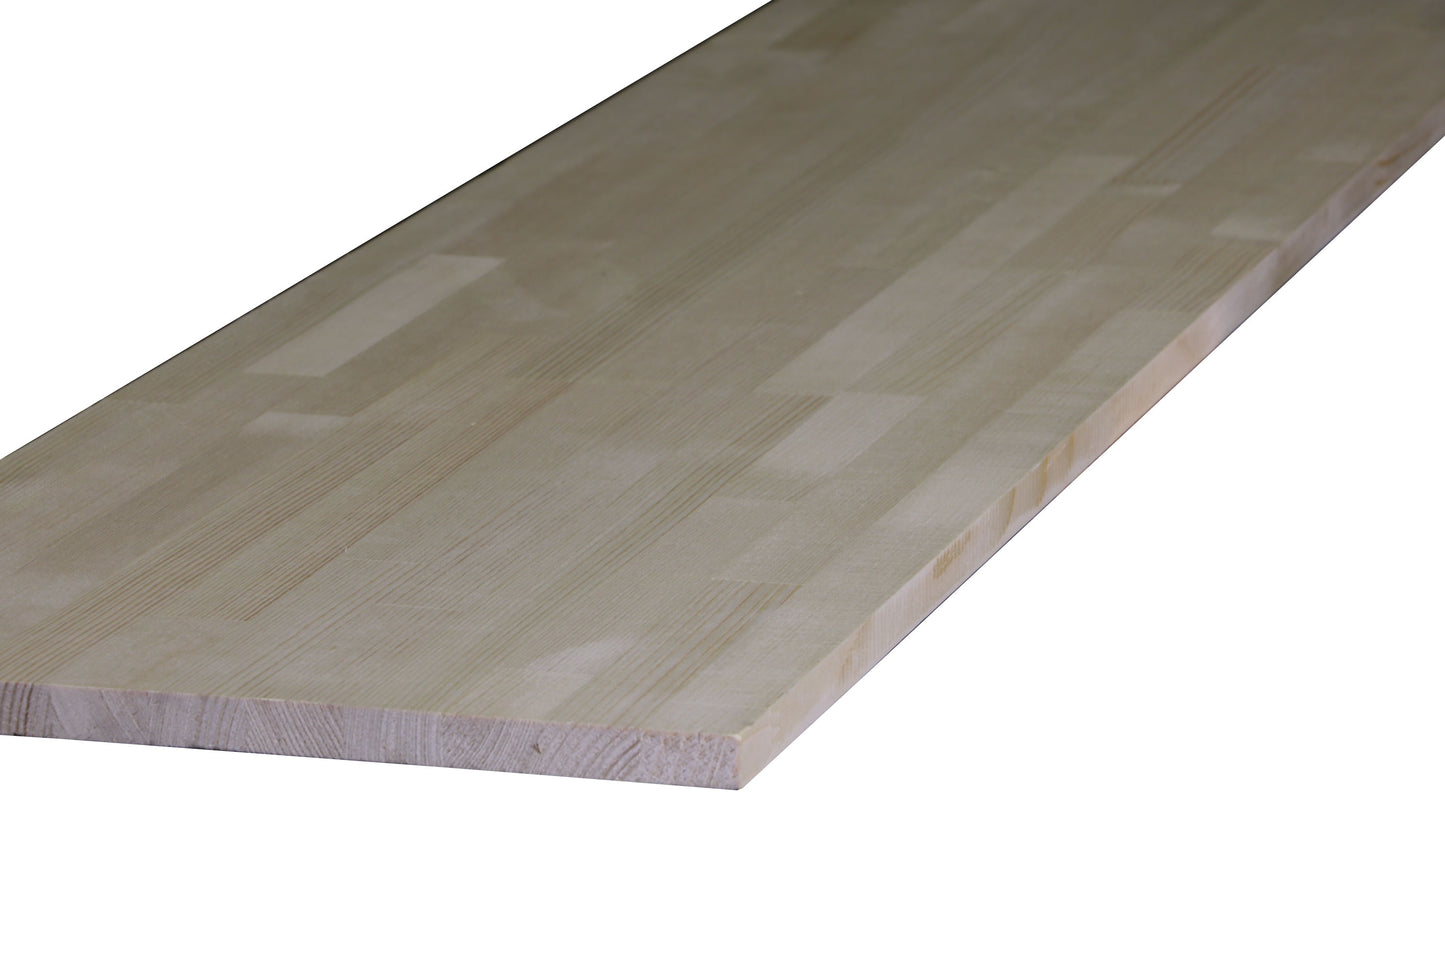 Ele-Joint Natural Wood - White Spruce AA Unfinished - 5/8" x 4' x 8'